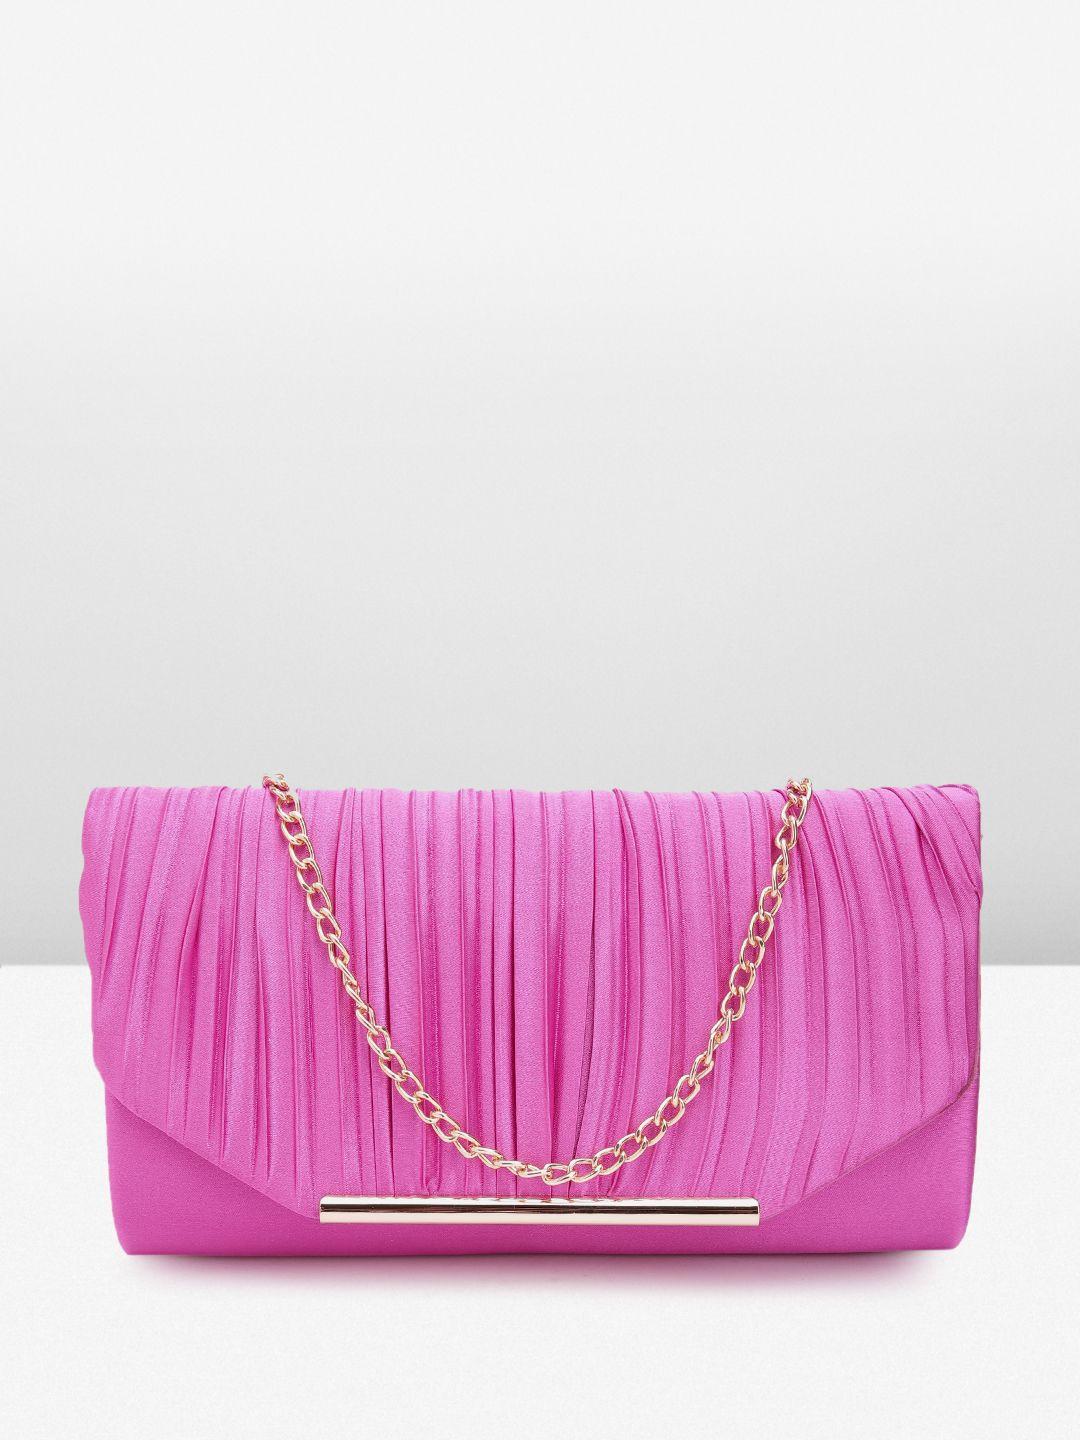 dorothy perkins ruched detail clutch